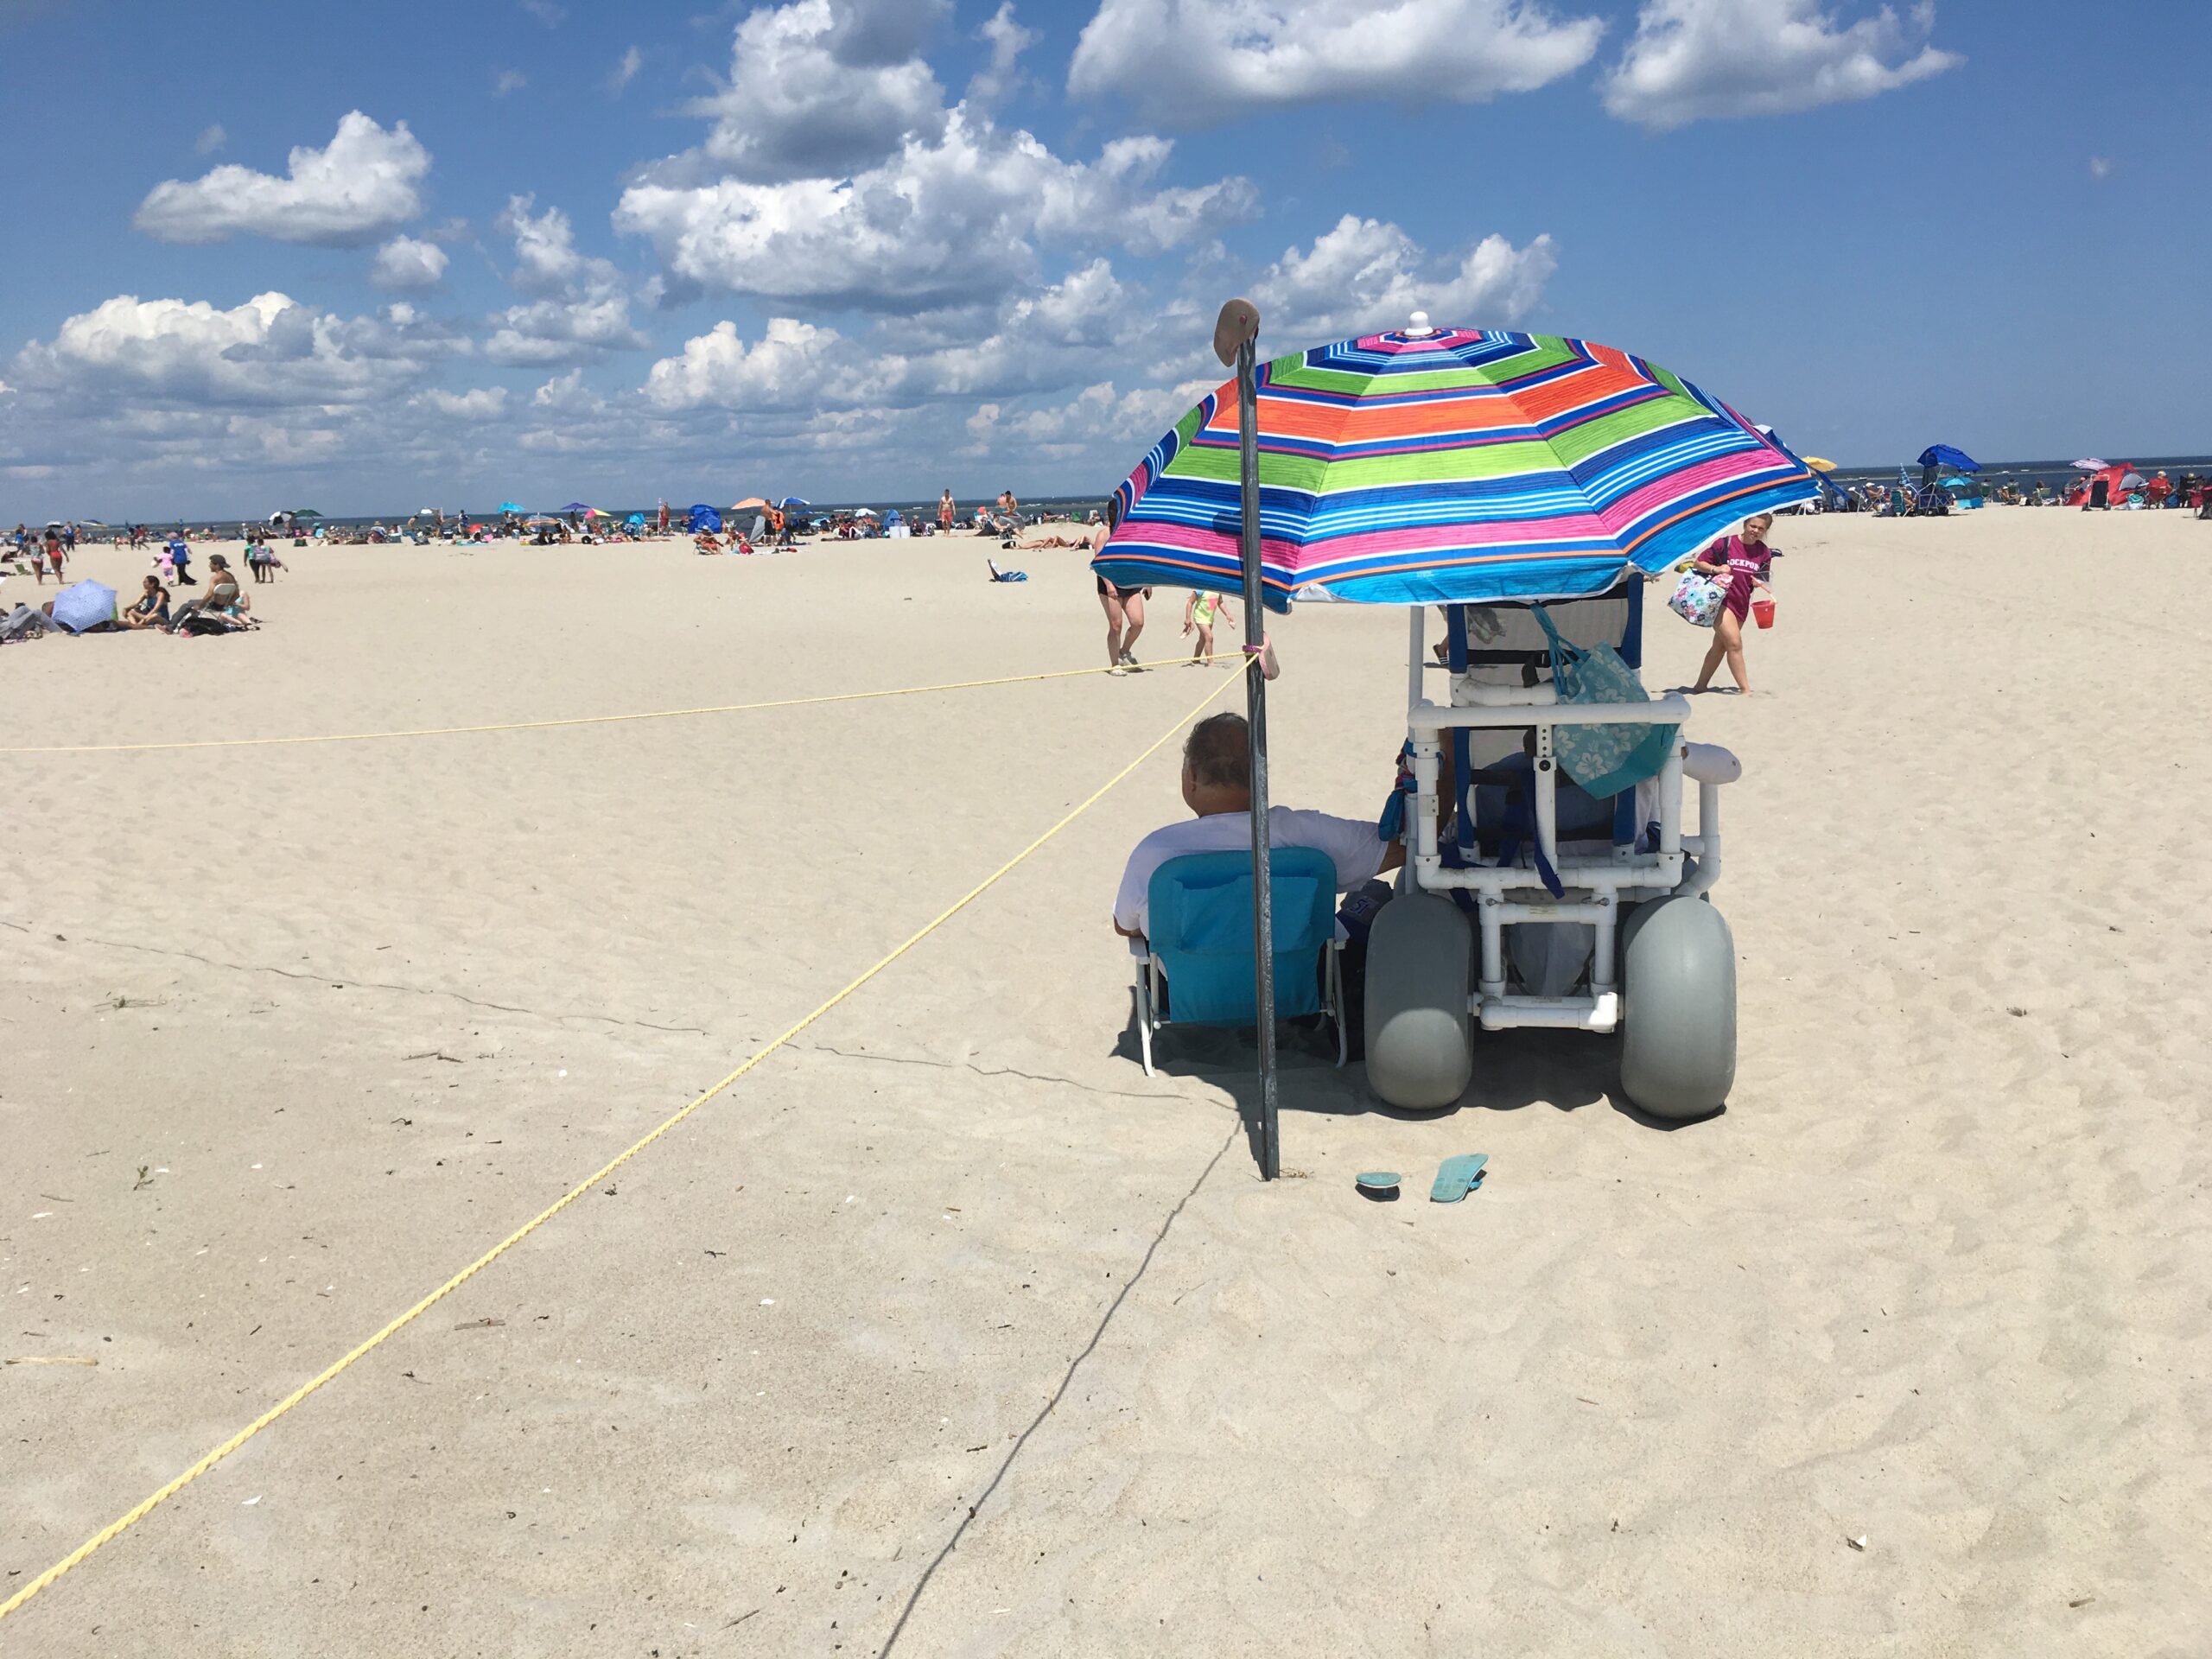 Two people sit with backs to the camera on the beach under an umbrella. One person is in a beach wheelchair and the other is sitting in a beach chair.